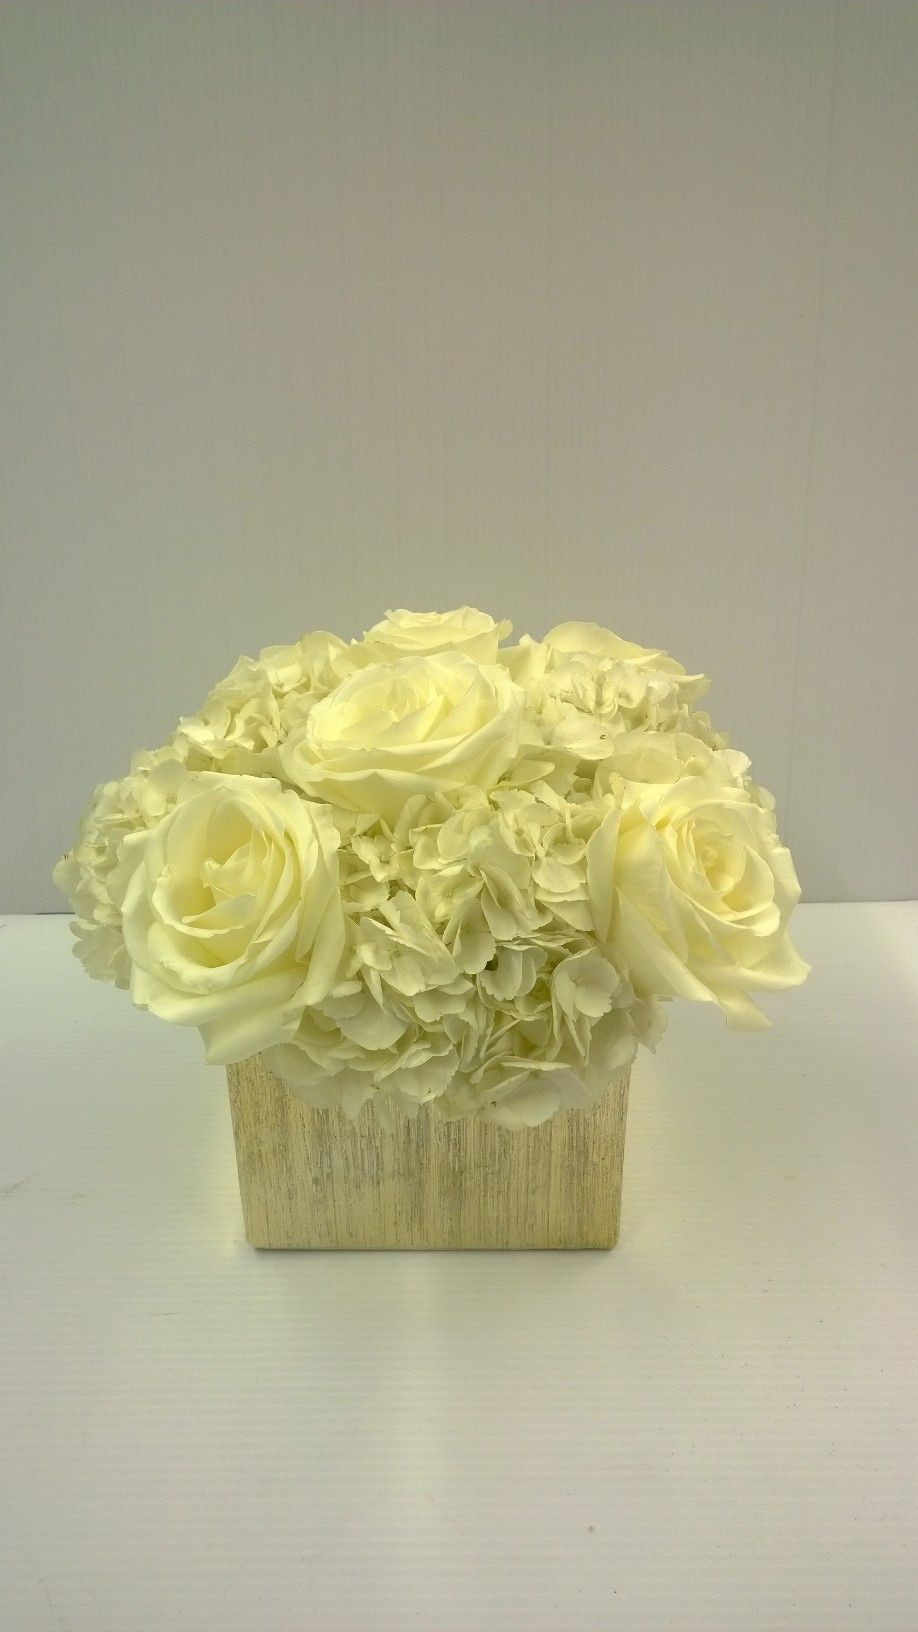 13 Amazing Gold Rectangle Vase 2024 free download gold rectangle vase of gold vase centerpiece gold ceramic cube with 3 white hydrangeas throughout gold vase centerpiece gold ceramic cube with 3 white hydrangeas and 6 white open roses